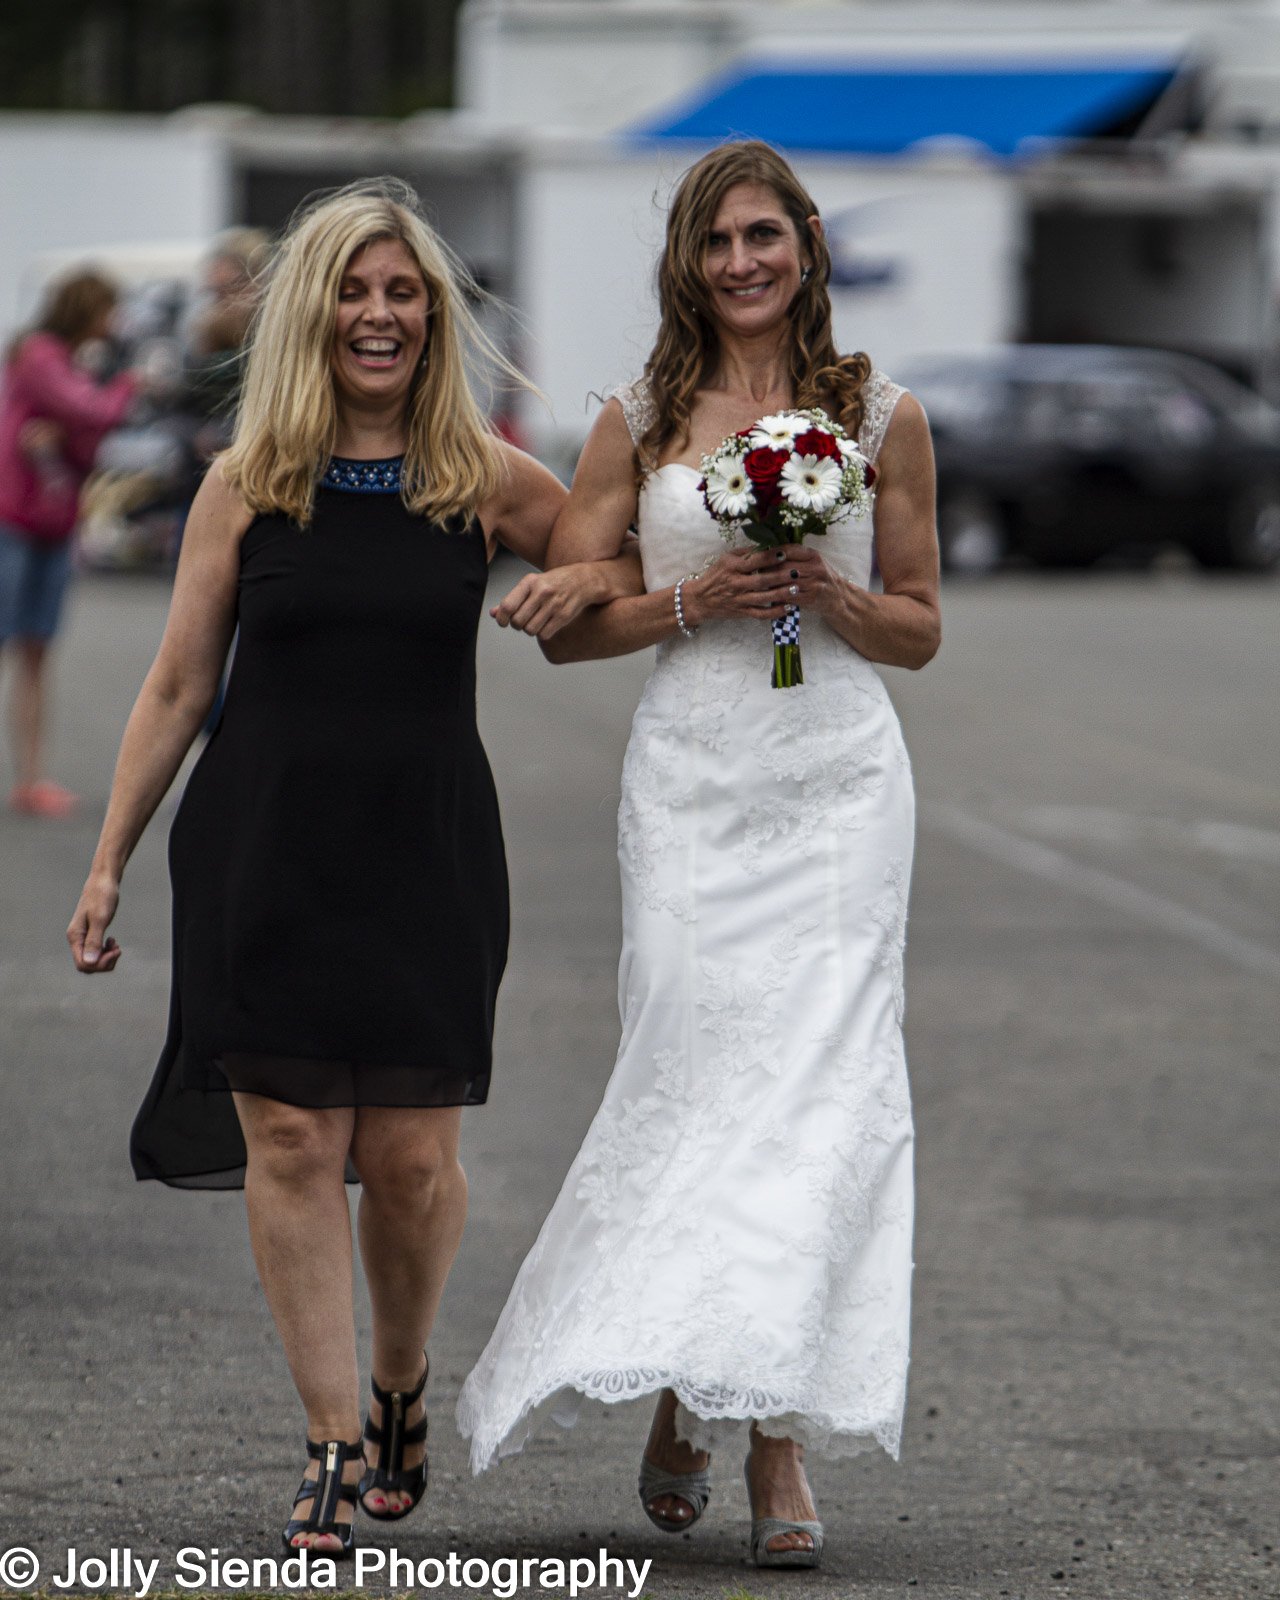 Wedding at the Bremerton Race Track